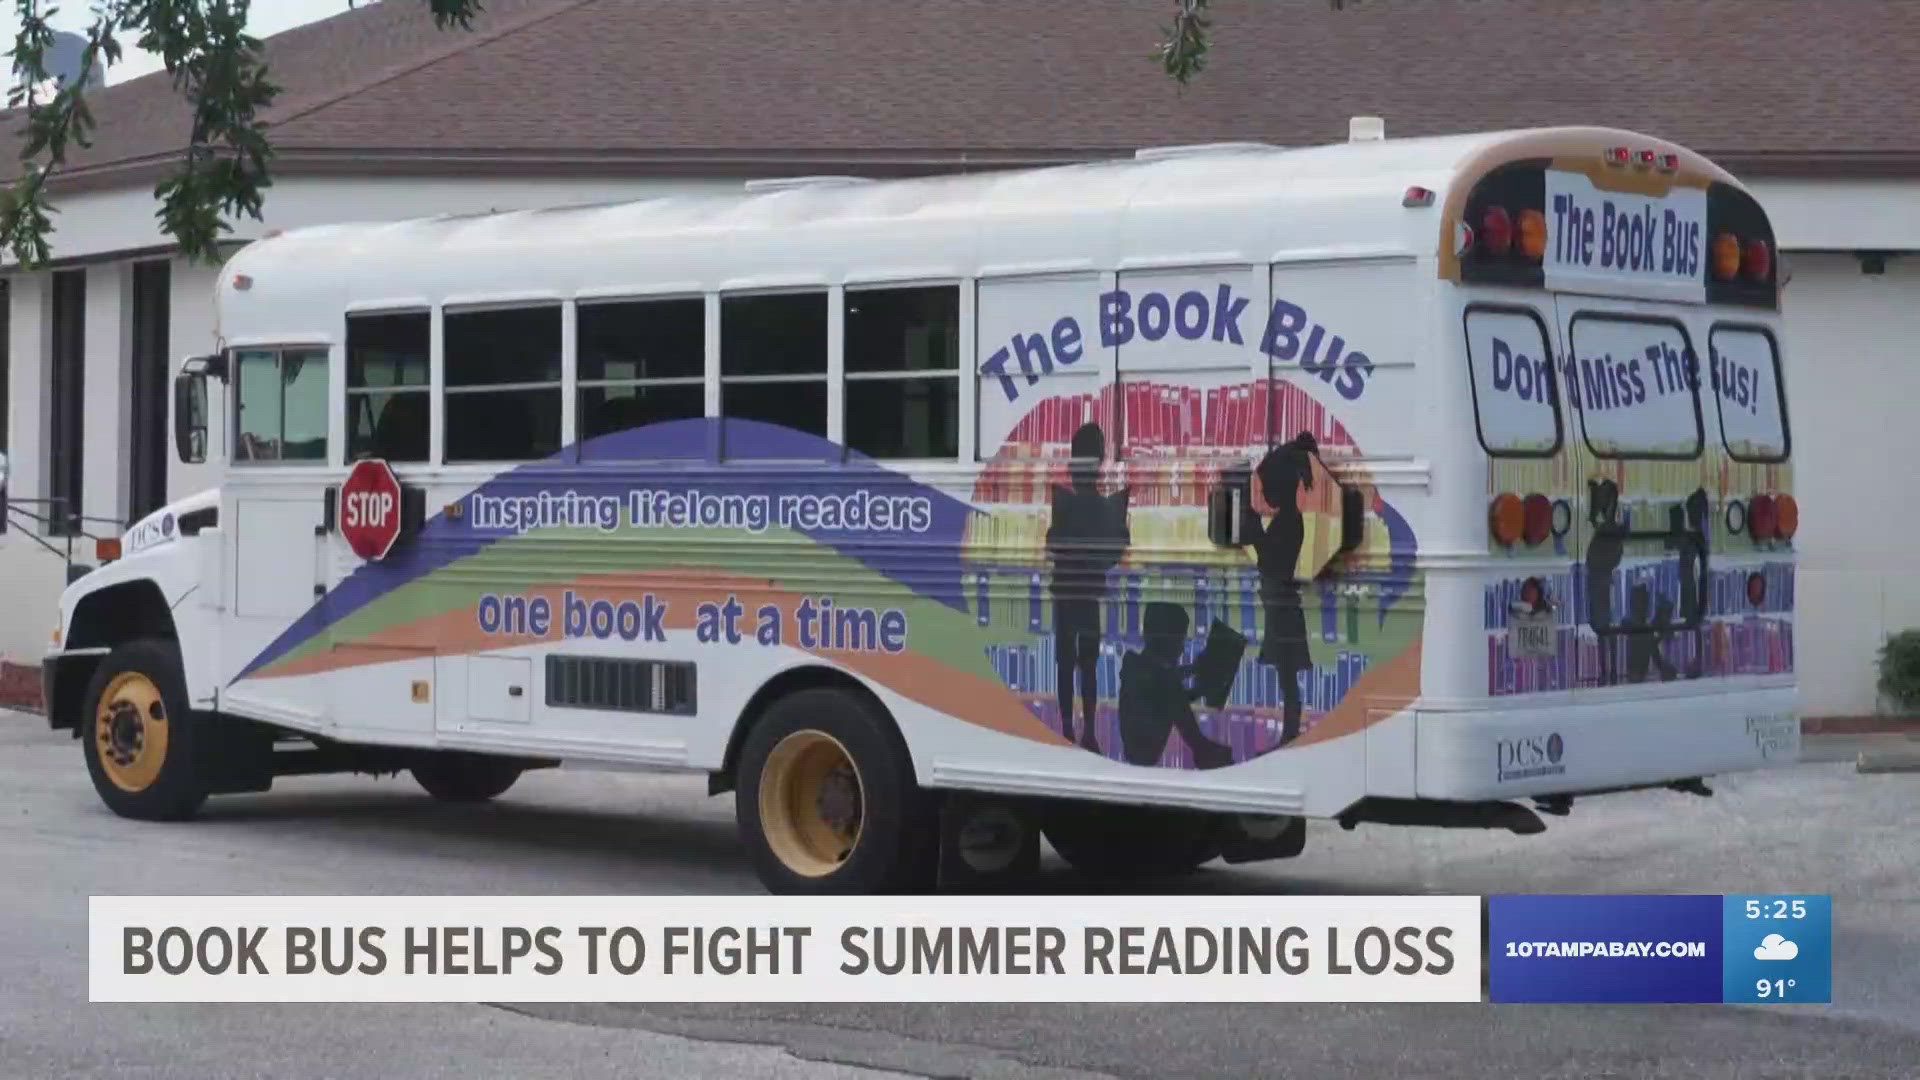 The two buses aim to instill a love of reading in kids and make sure they're reaching important grade-level milestones.